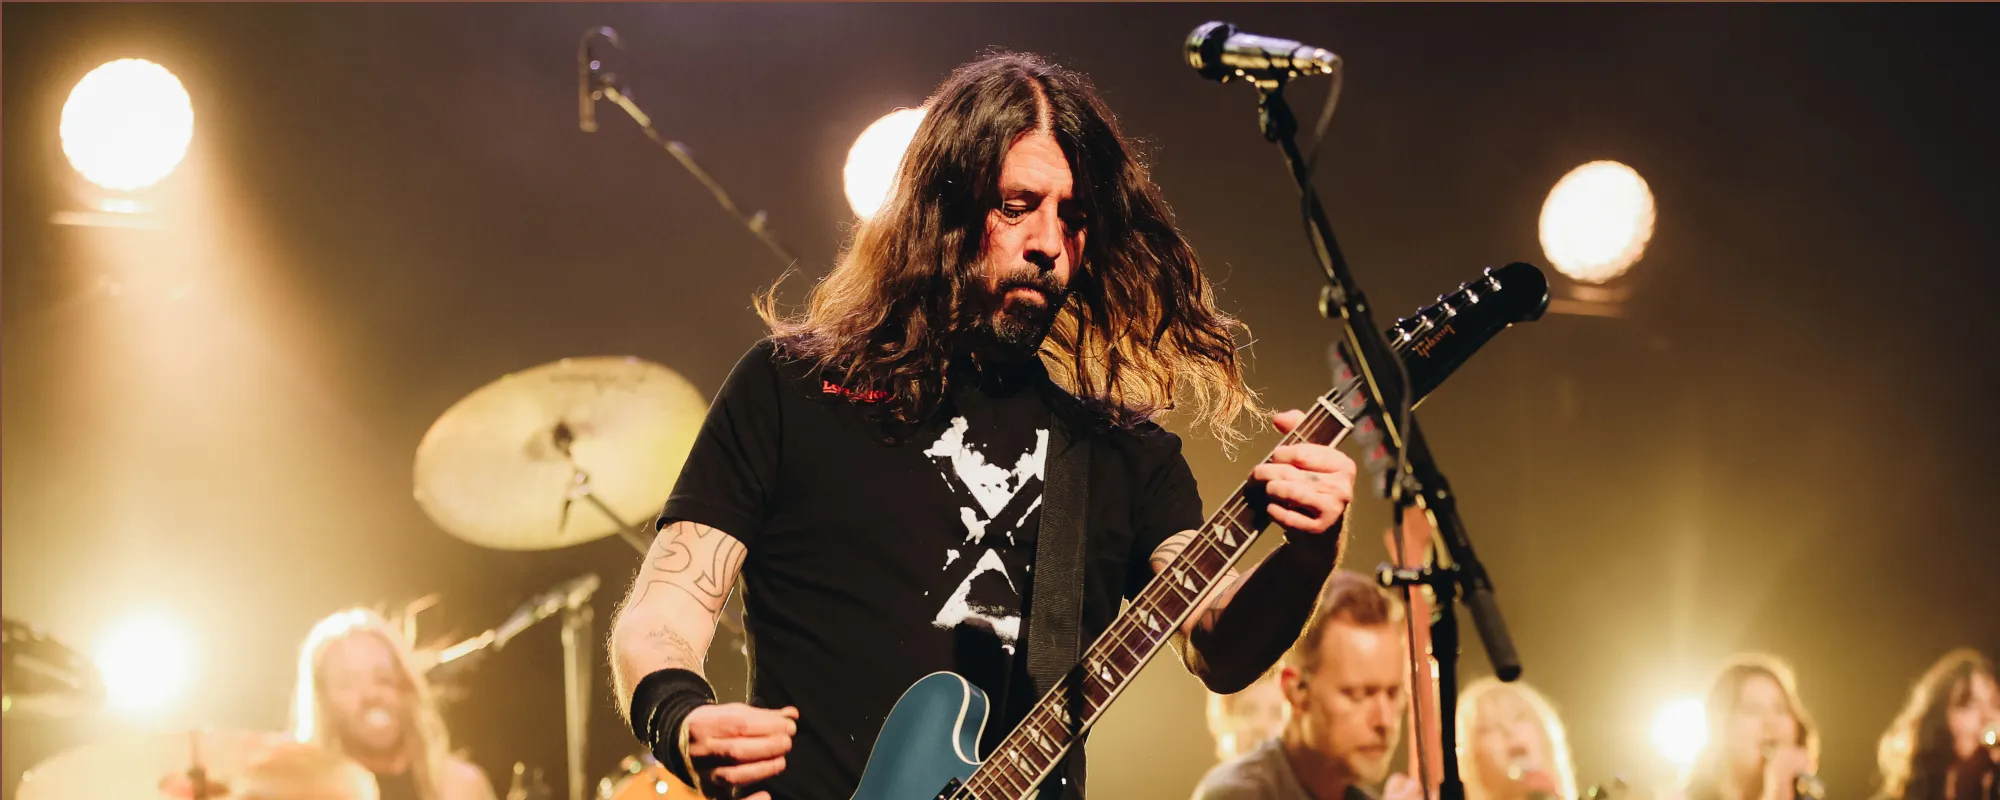 Watch: Foo Fighters Animated Trailer Teases Band’s Limited-Edition Pinball Machine